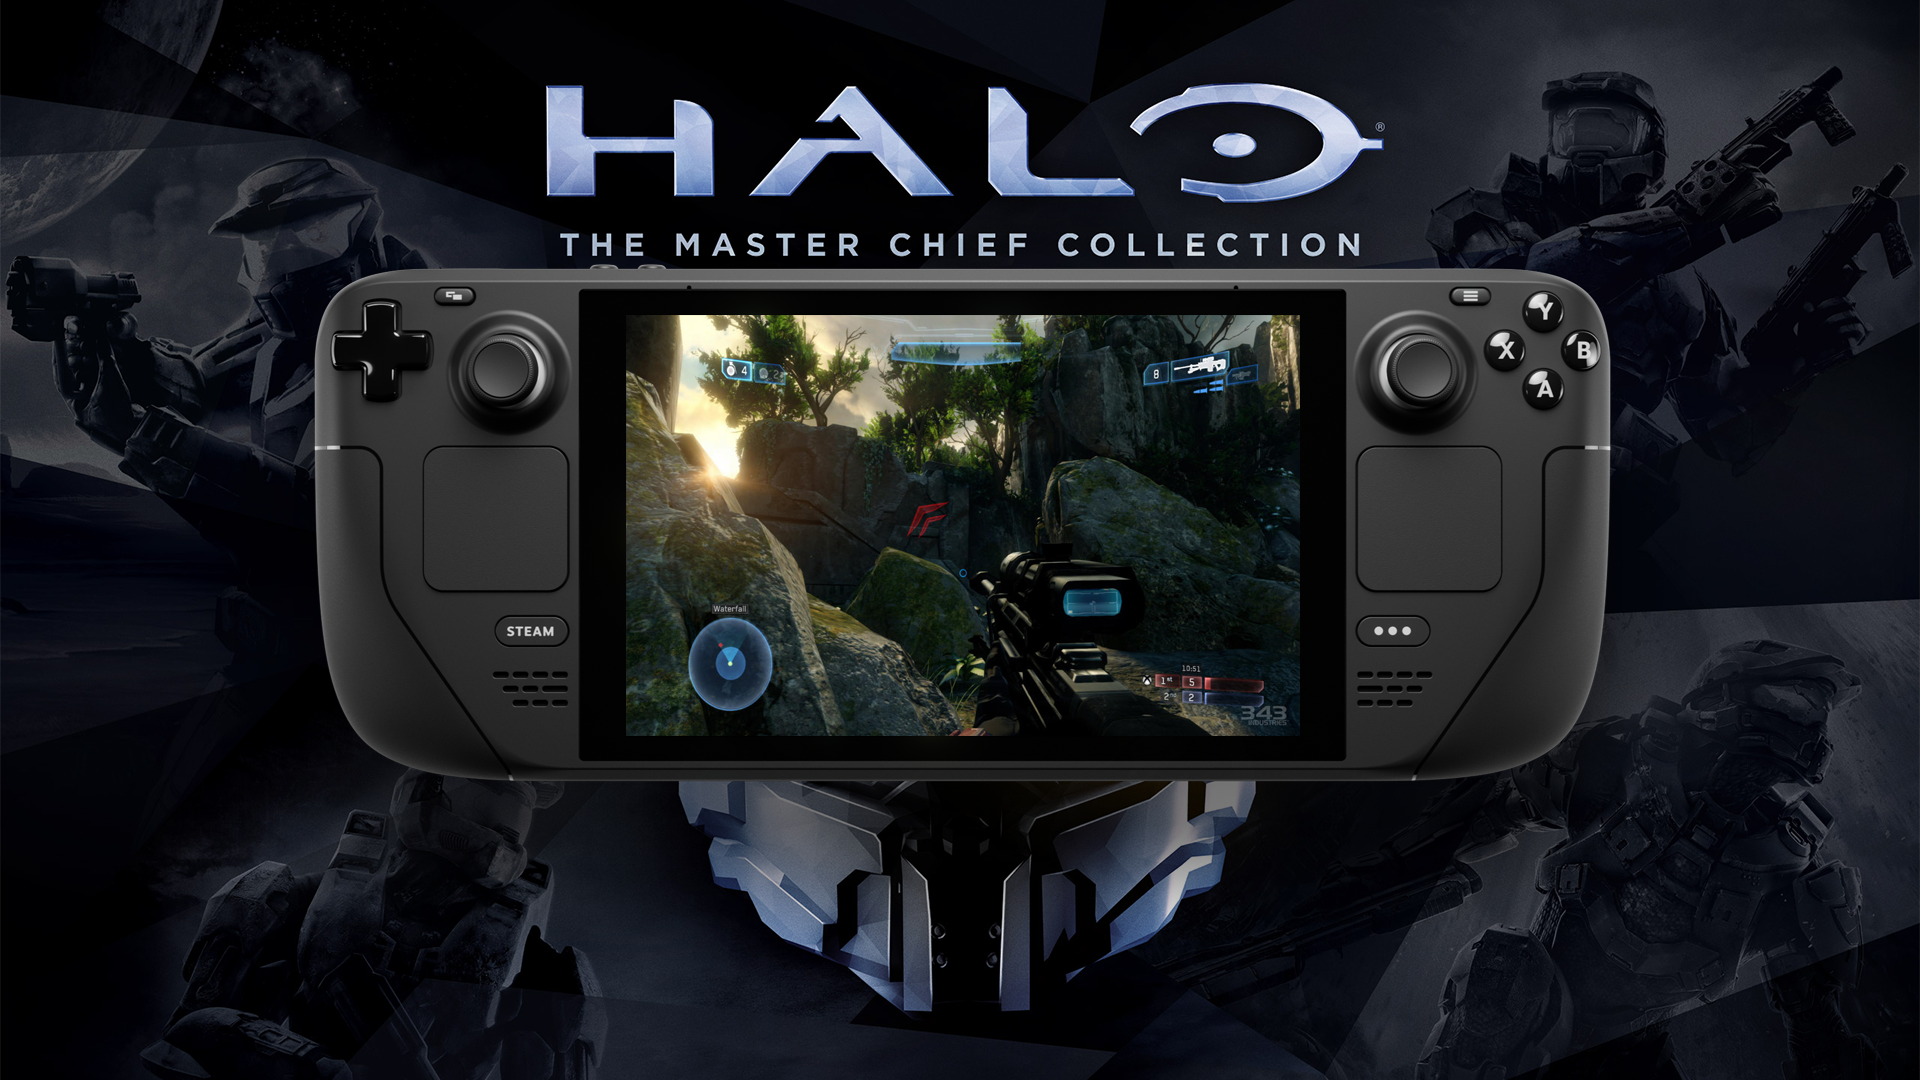 Halo: The Master Chief Collection' Coming To Steam, Adding 'Halo